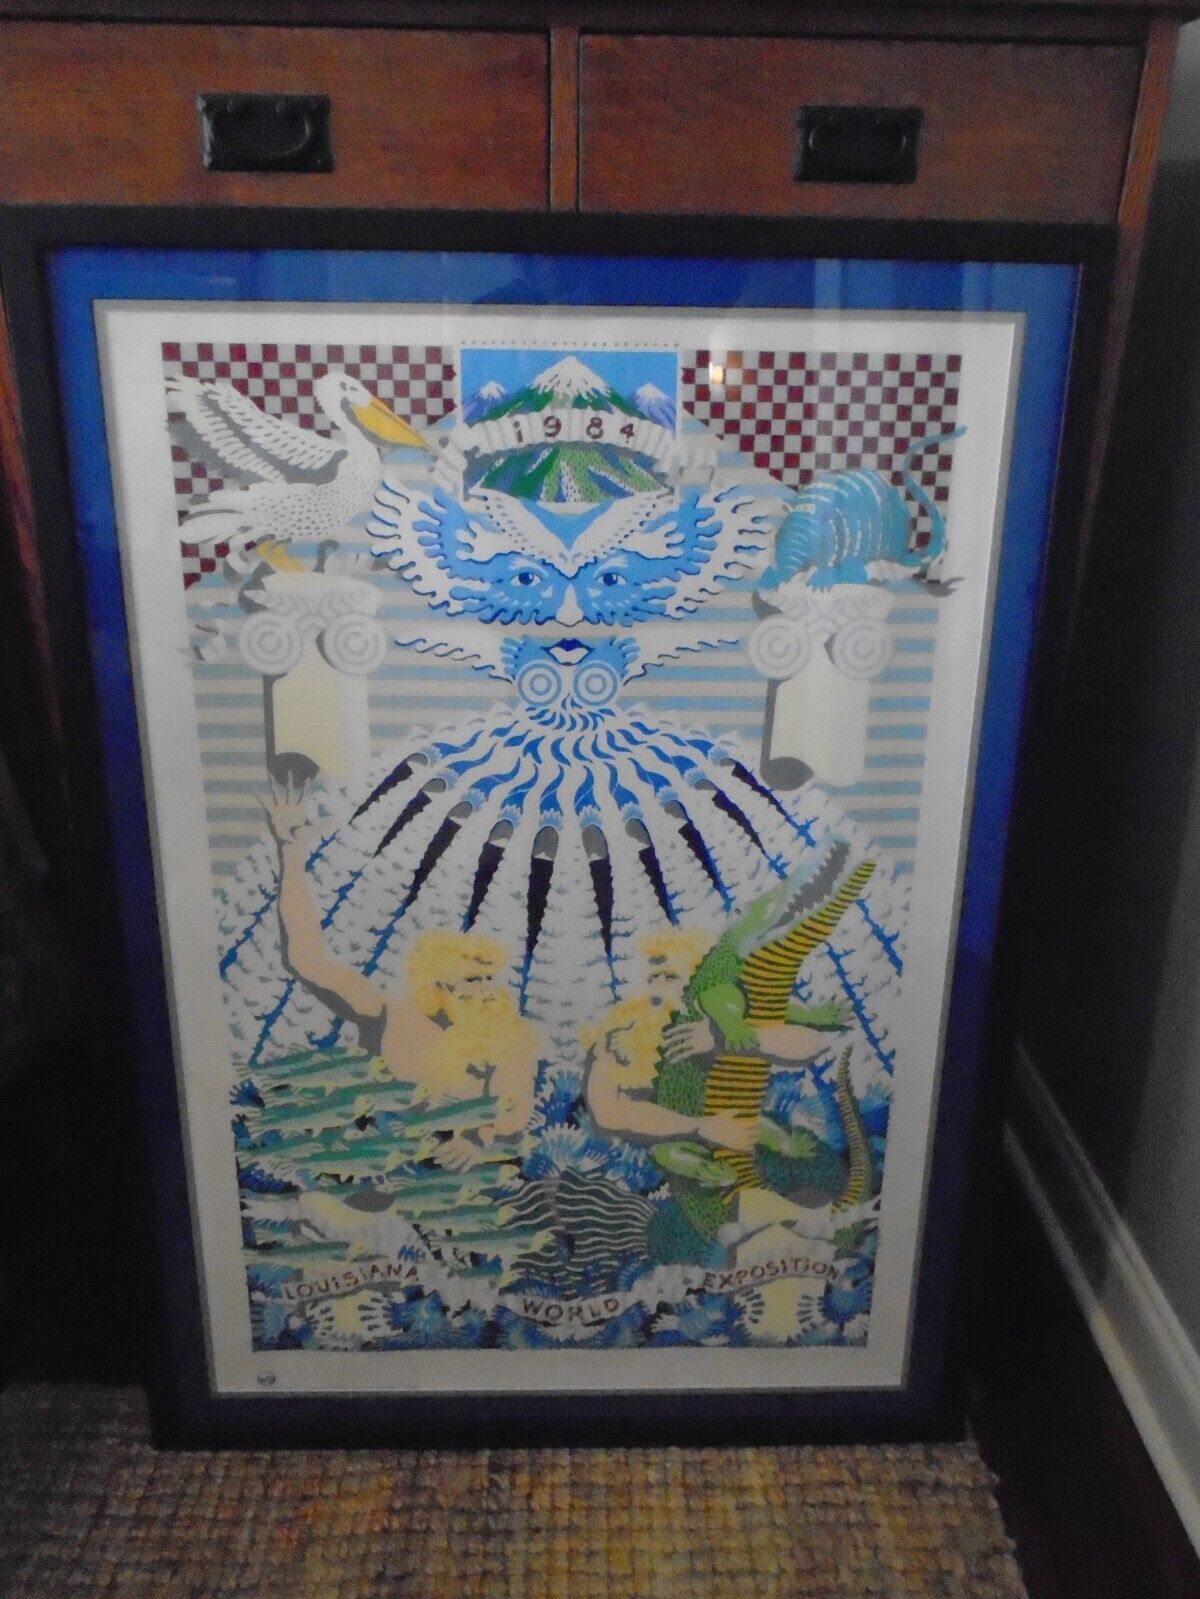 Rare 1984 Louisiana World Exposition Lithograph, Signed/Numbered poster